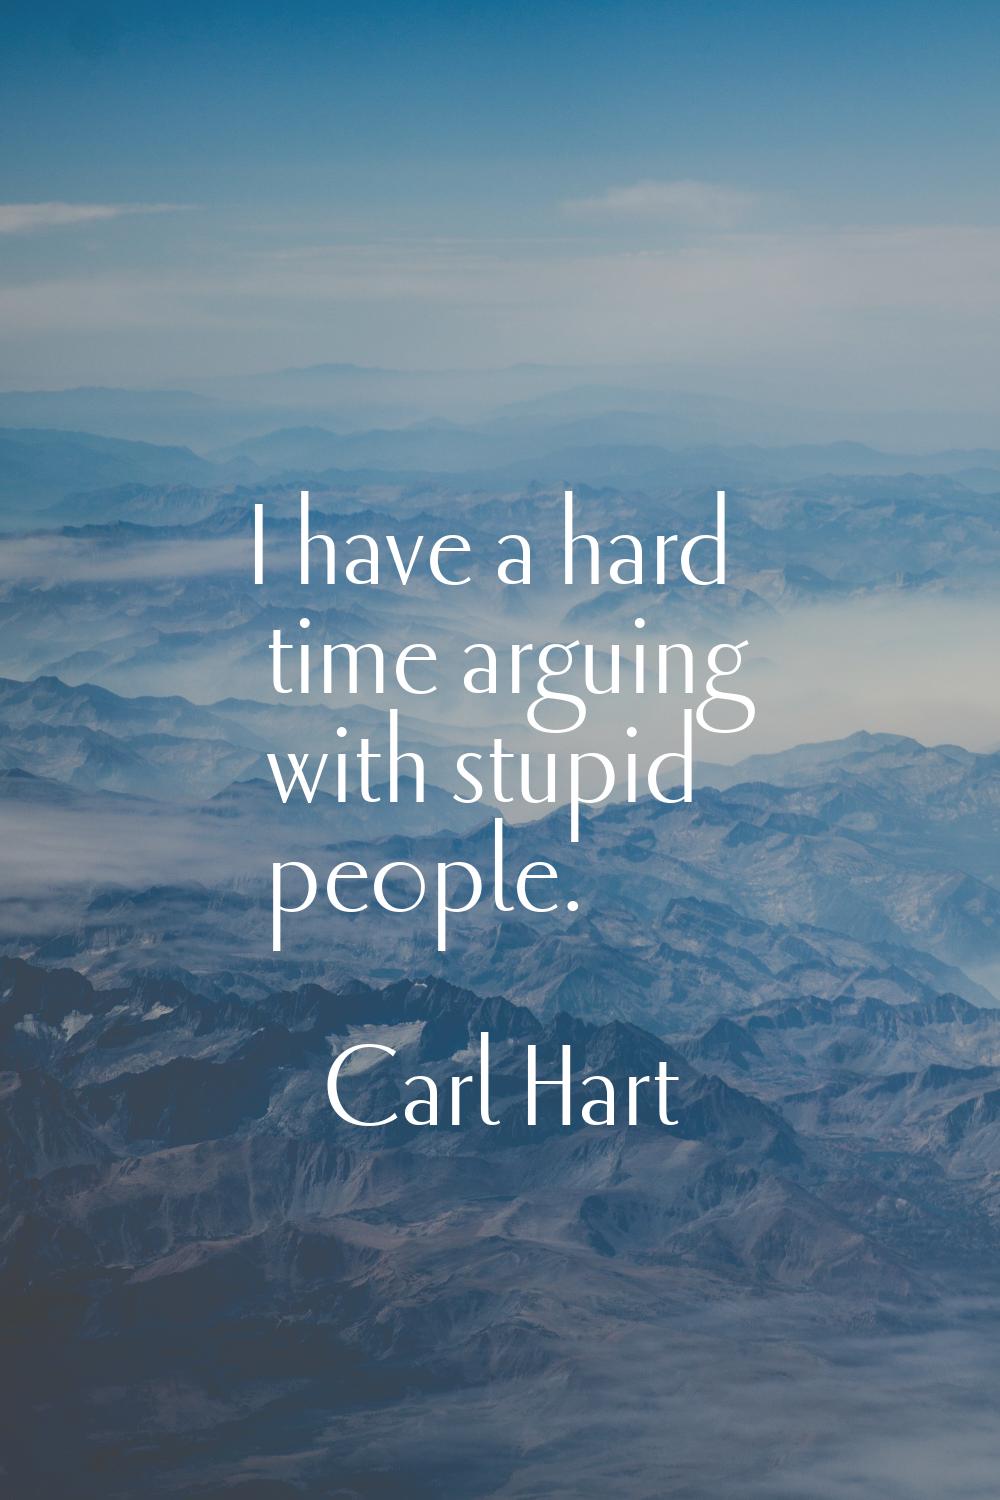 I have a hard time arguing with stupid people.